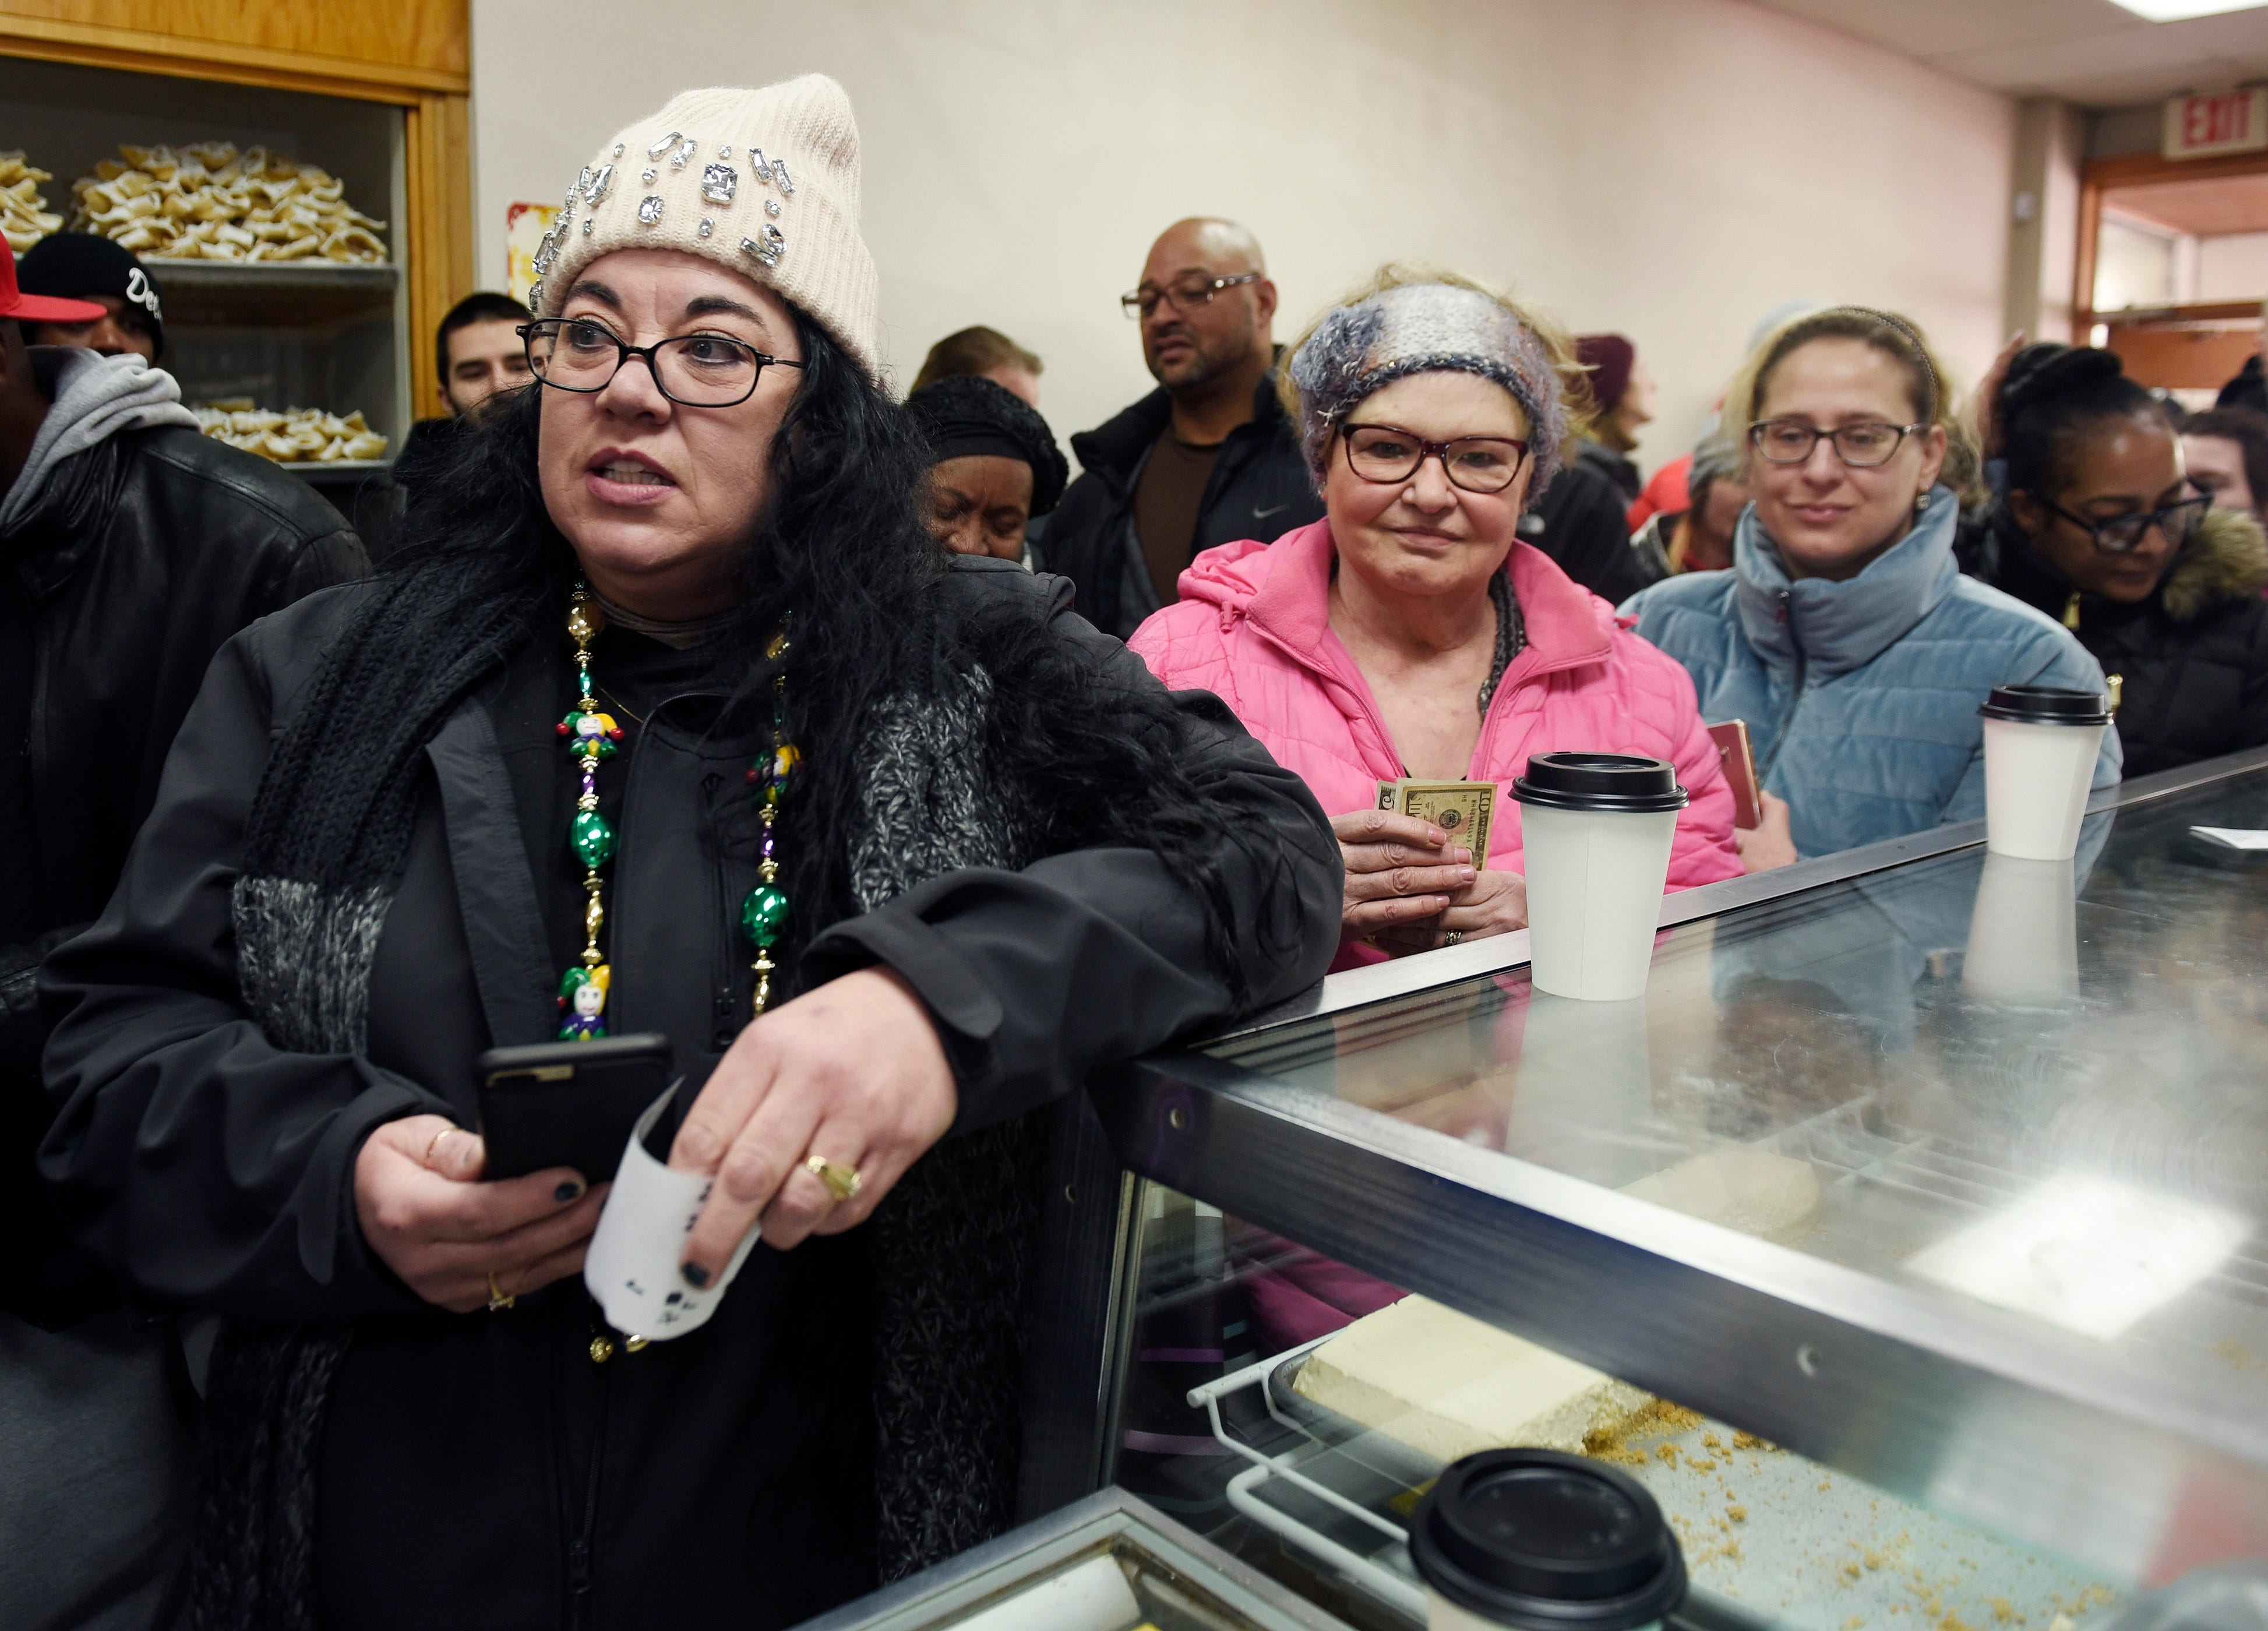 Koleen Schaf, (l), of Tayor and Caroline Stokes, (r), of West Bloomfield wait in line to purchase their paczki at New Martha Washington Bakery.